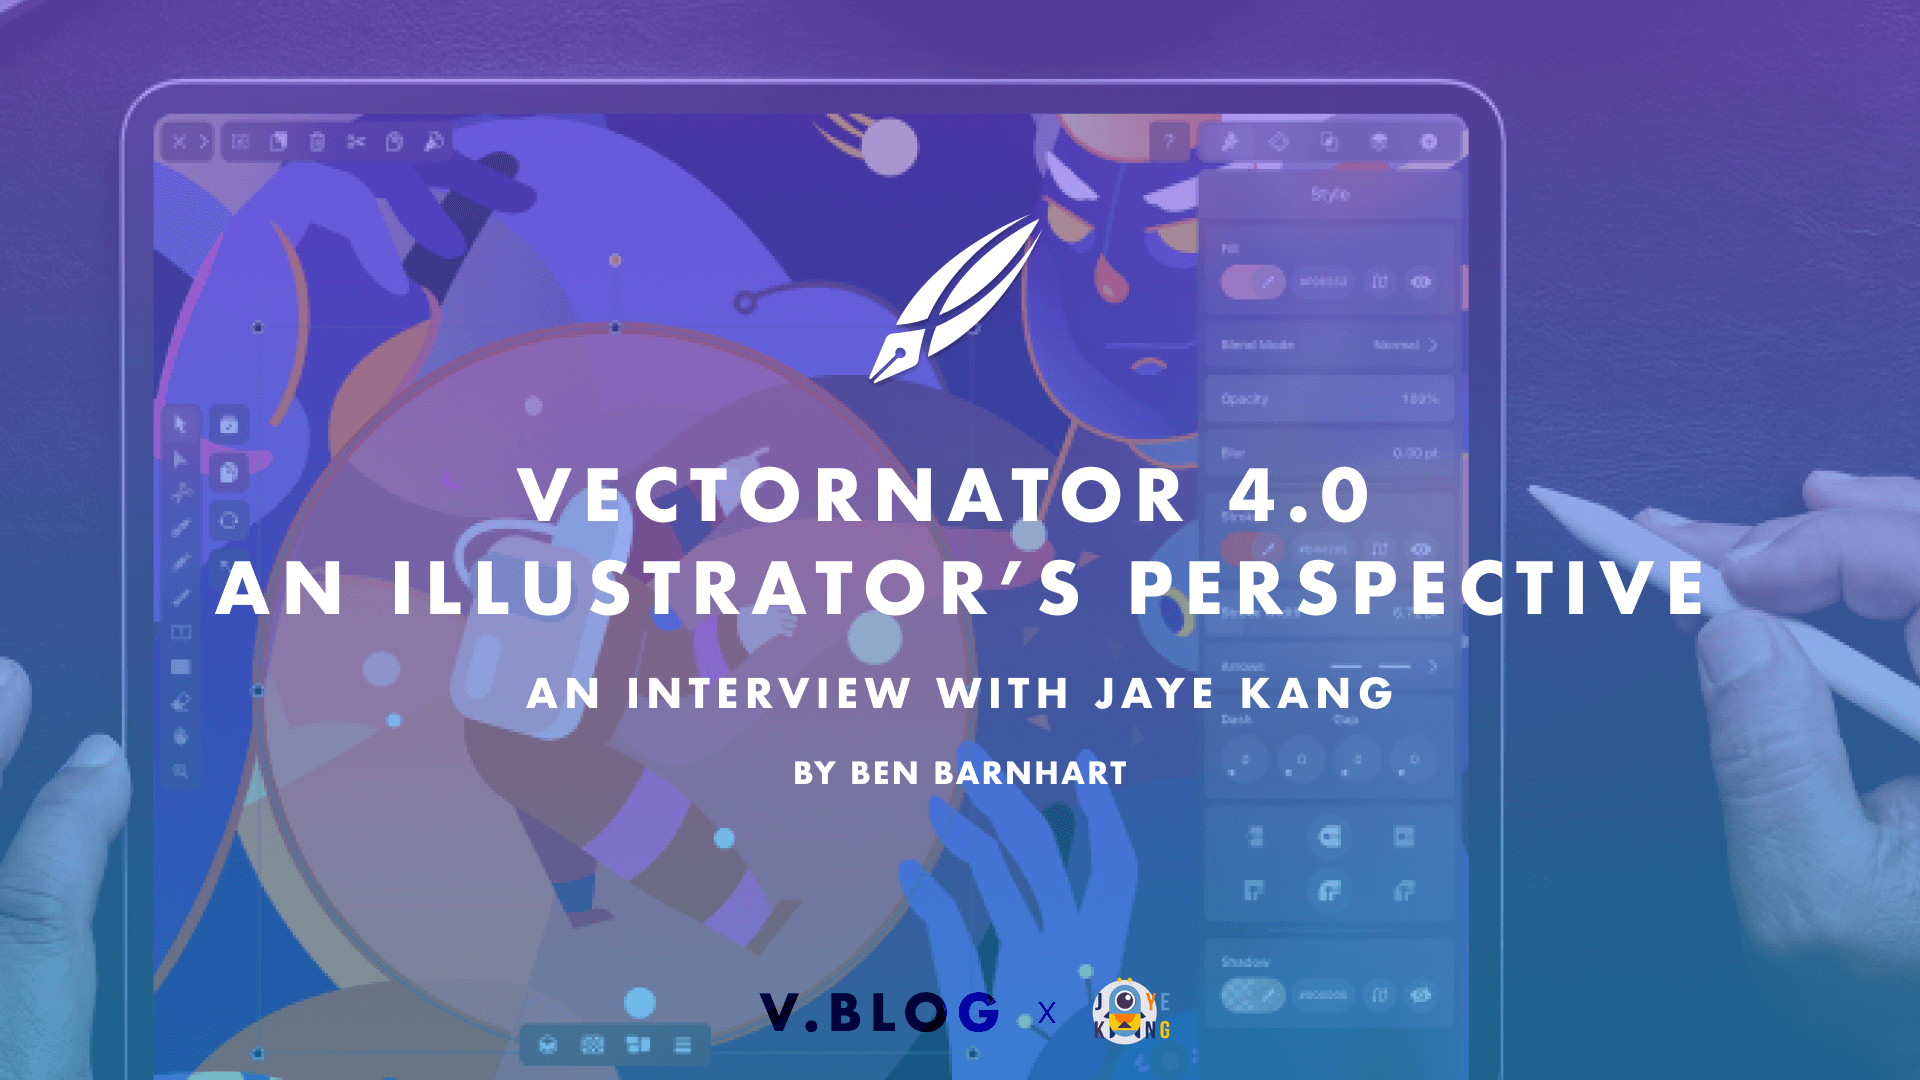 Vectornator 4.0 - an illustrator’s perspective | Linearity Curve (formerly Vectornator)